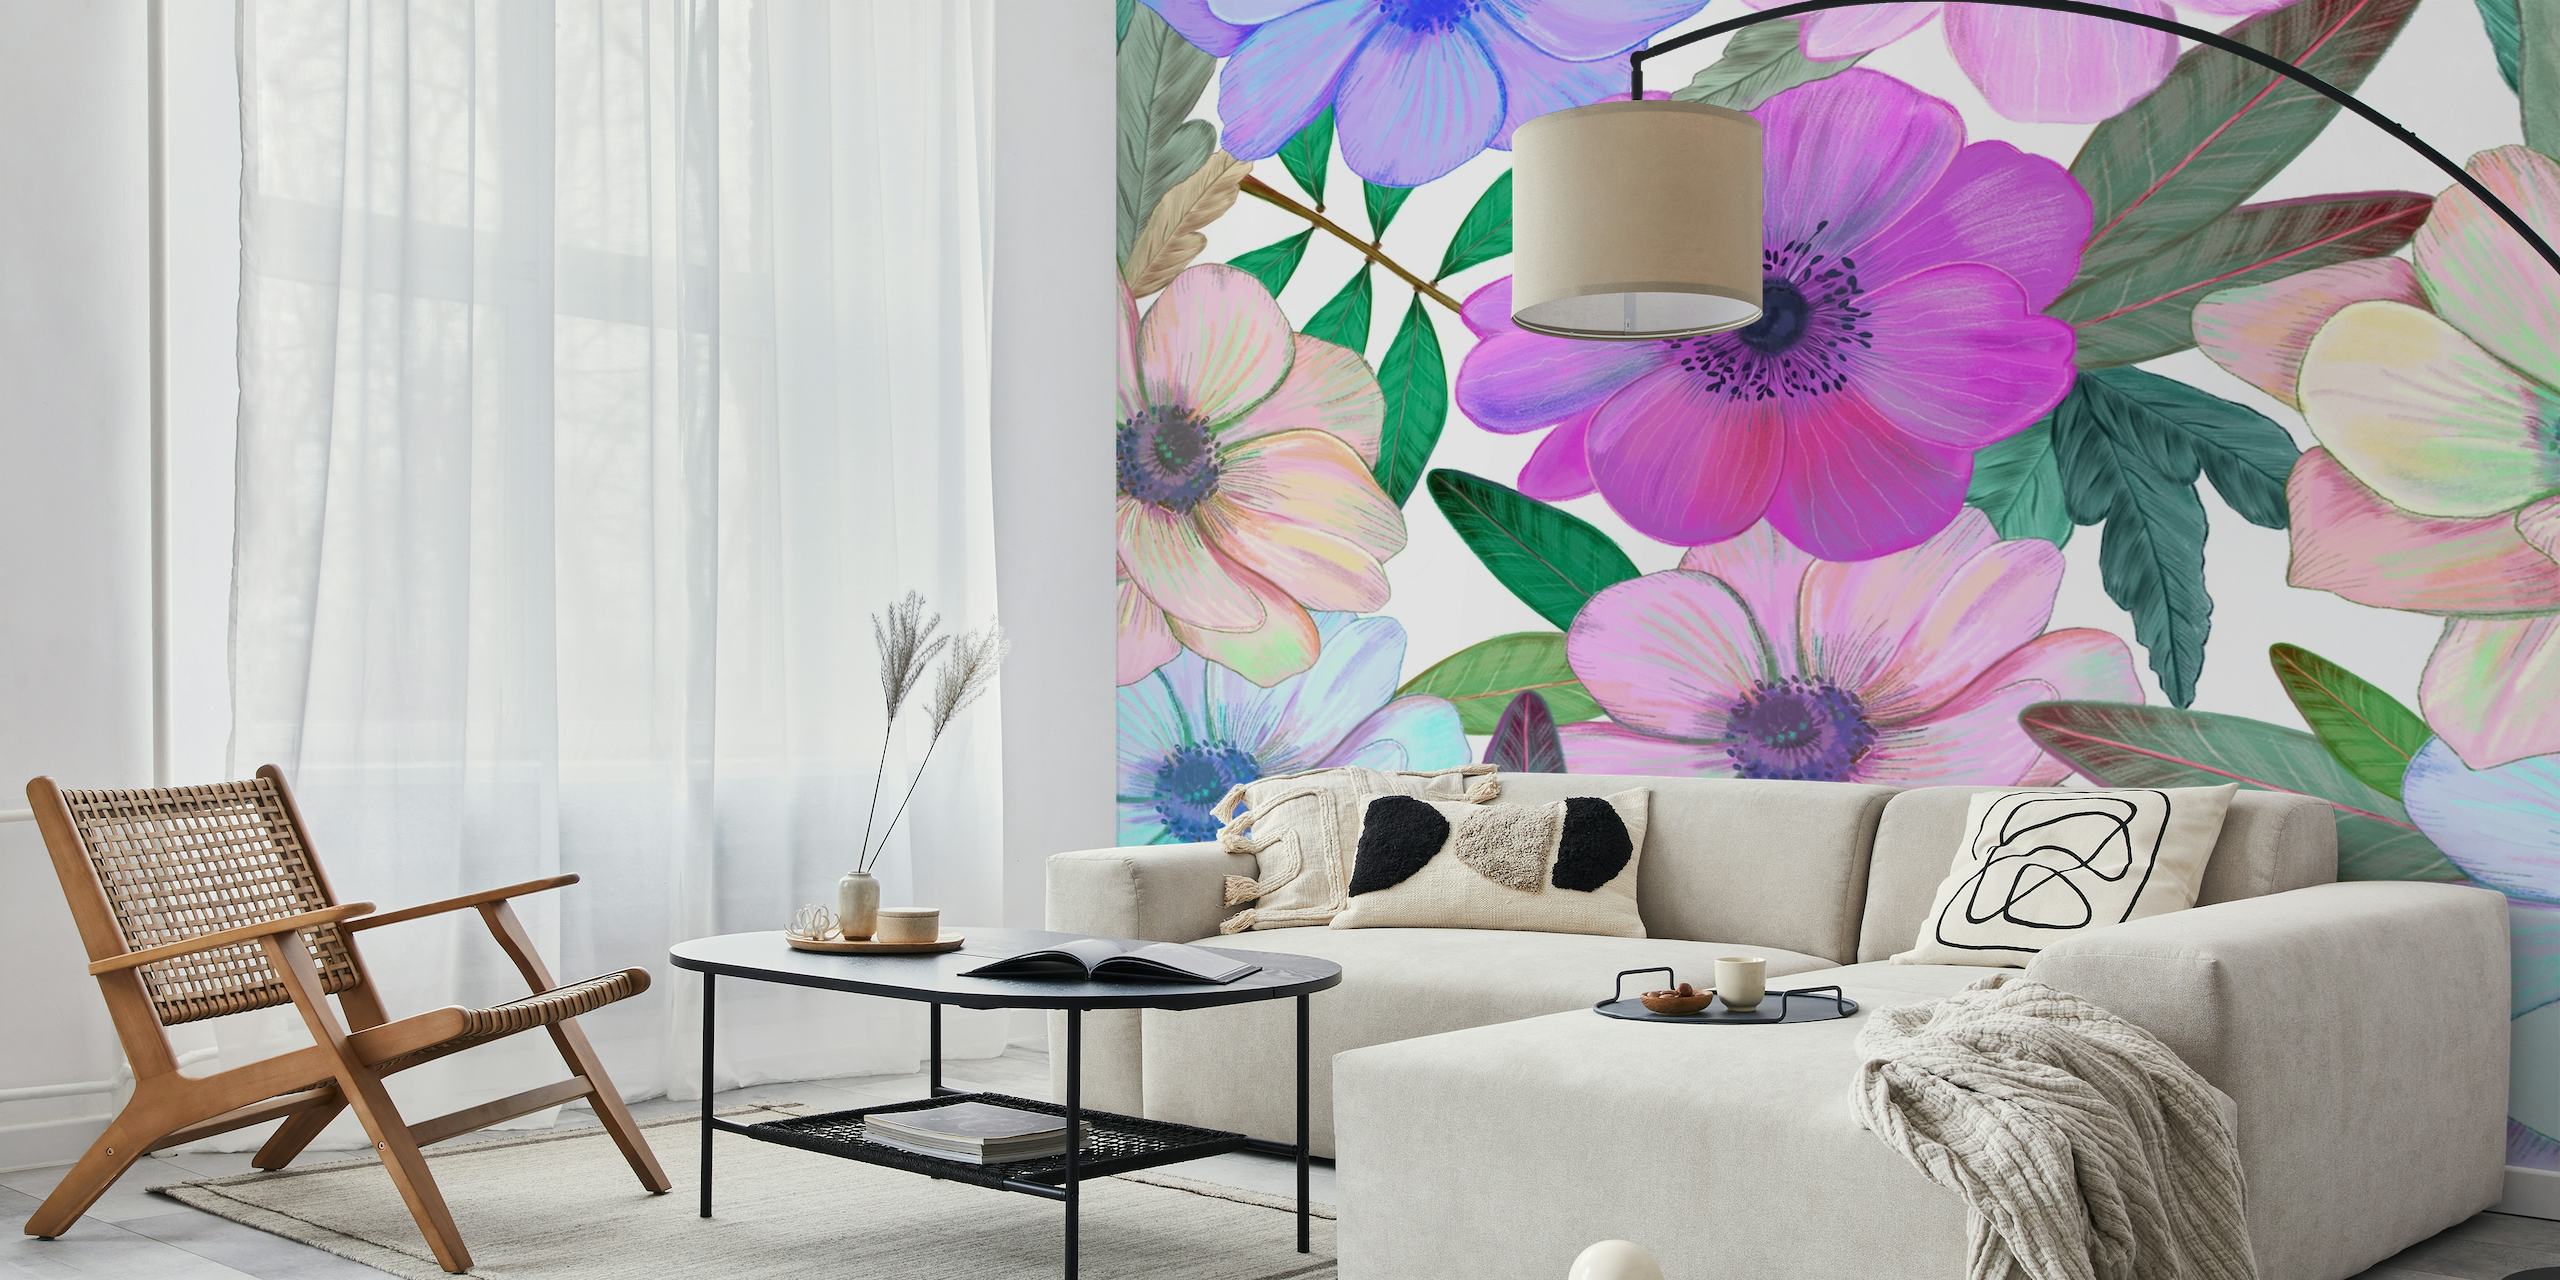 Hand drawn anemones wall mural with purple, pink, and blue flowers